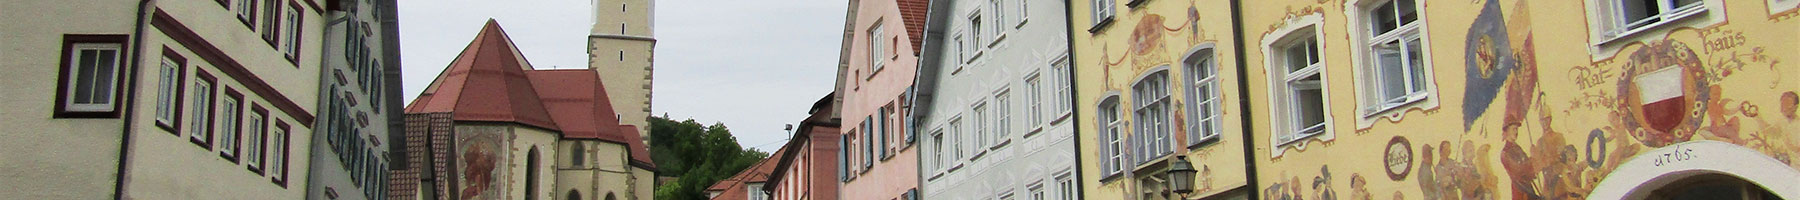 colorful houses in Horb, Germany